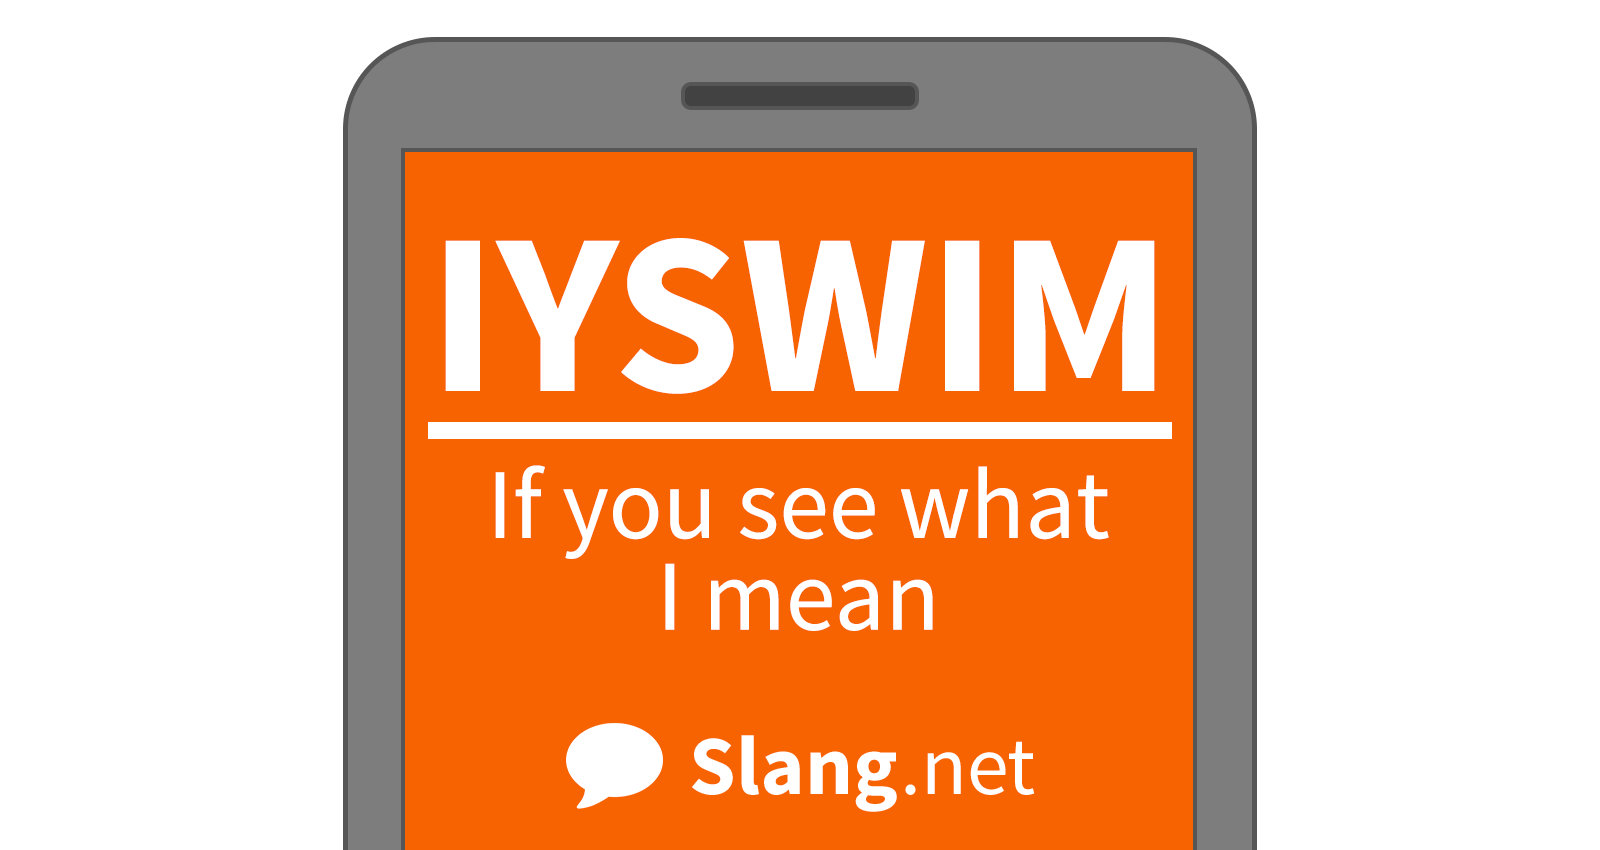 You will likely see IYSWIM in messages, but you may also see it online